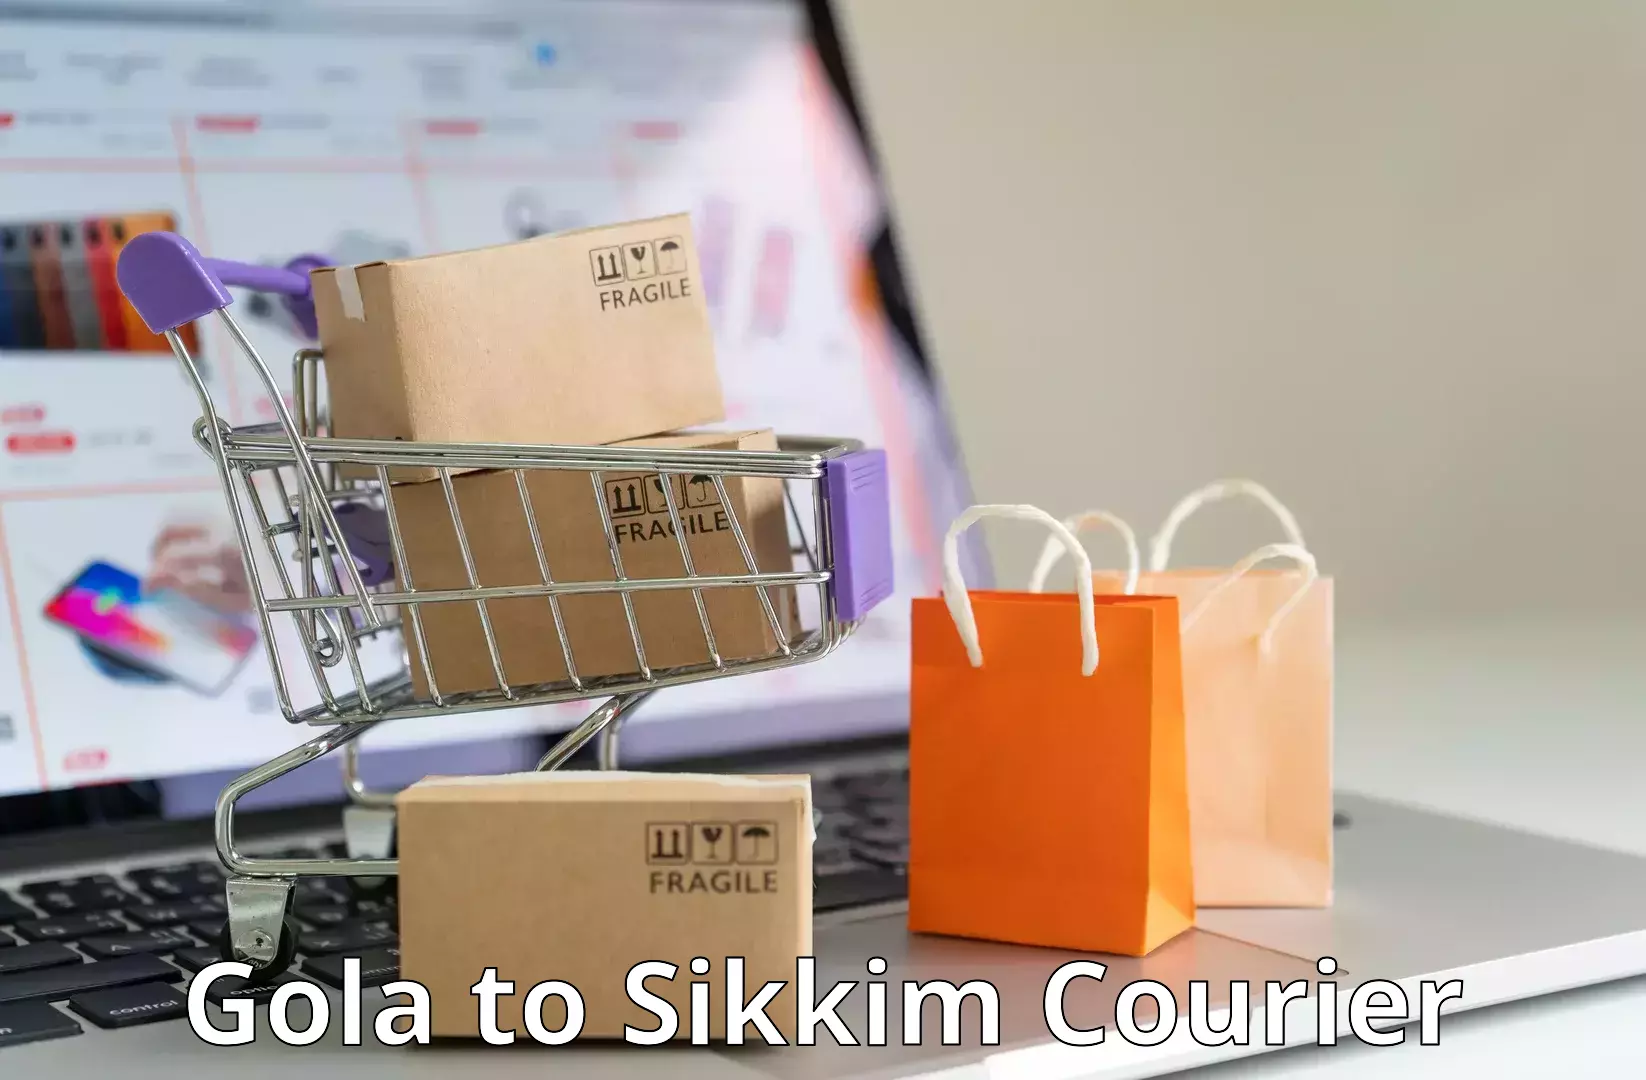 User-friendly delivery service Gola to North Sikkim